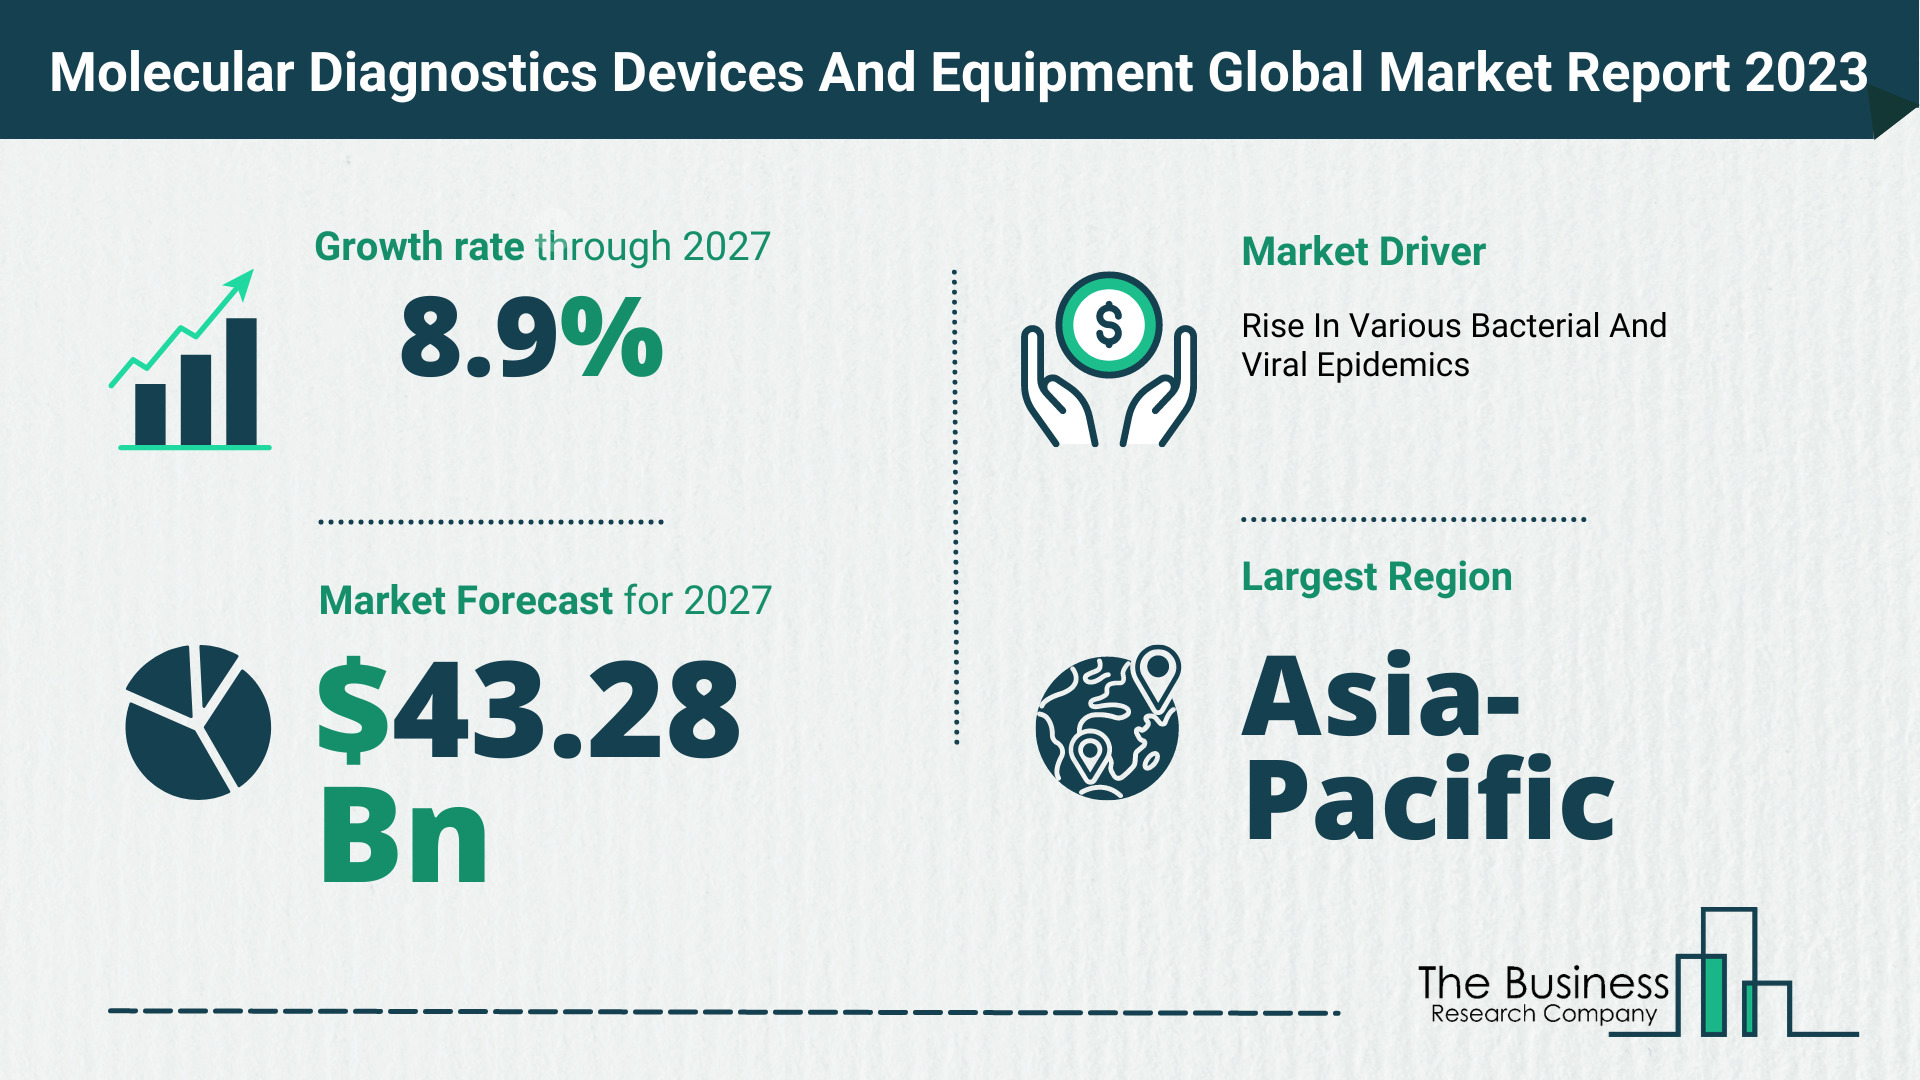 Molecular Diagnostics Devices And Equipment Market Size, Share, And Growth Rate Analysis 2023